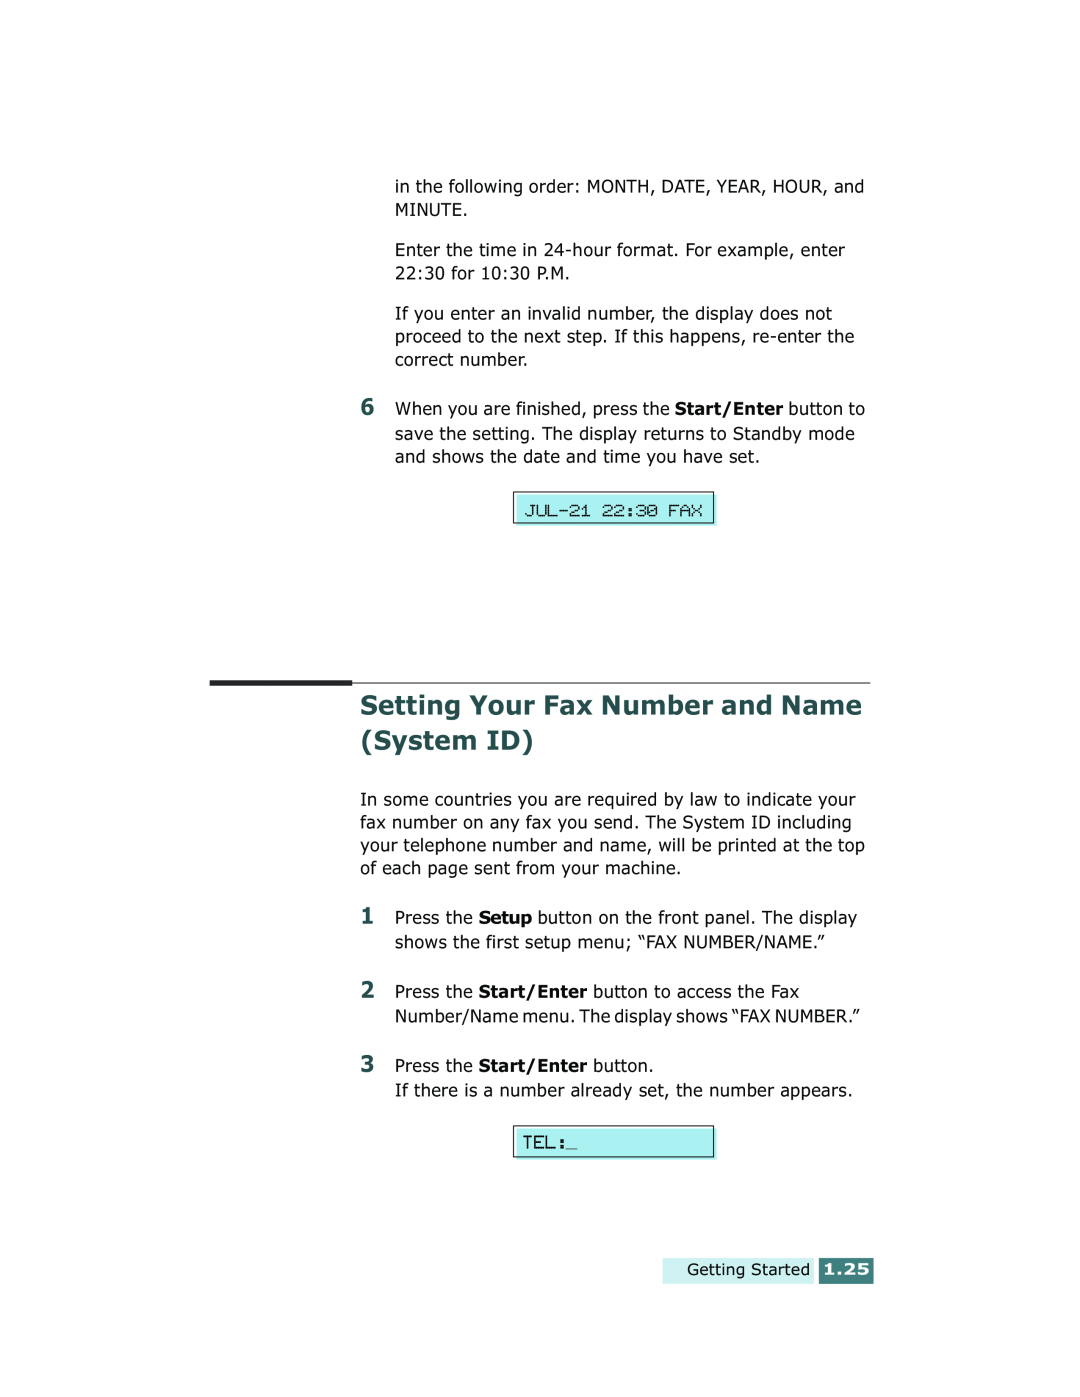 Xerox Pro 580 manual Setting Your Fax Number and Name System ID 